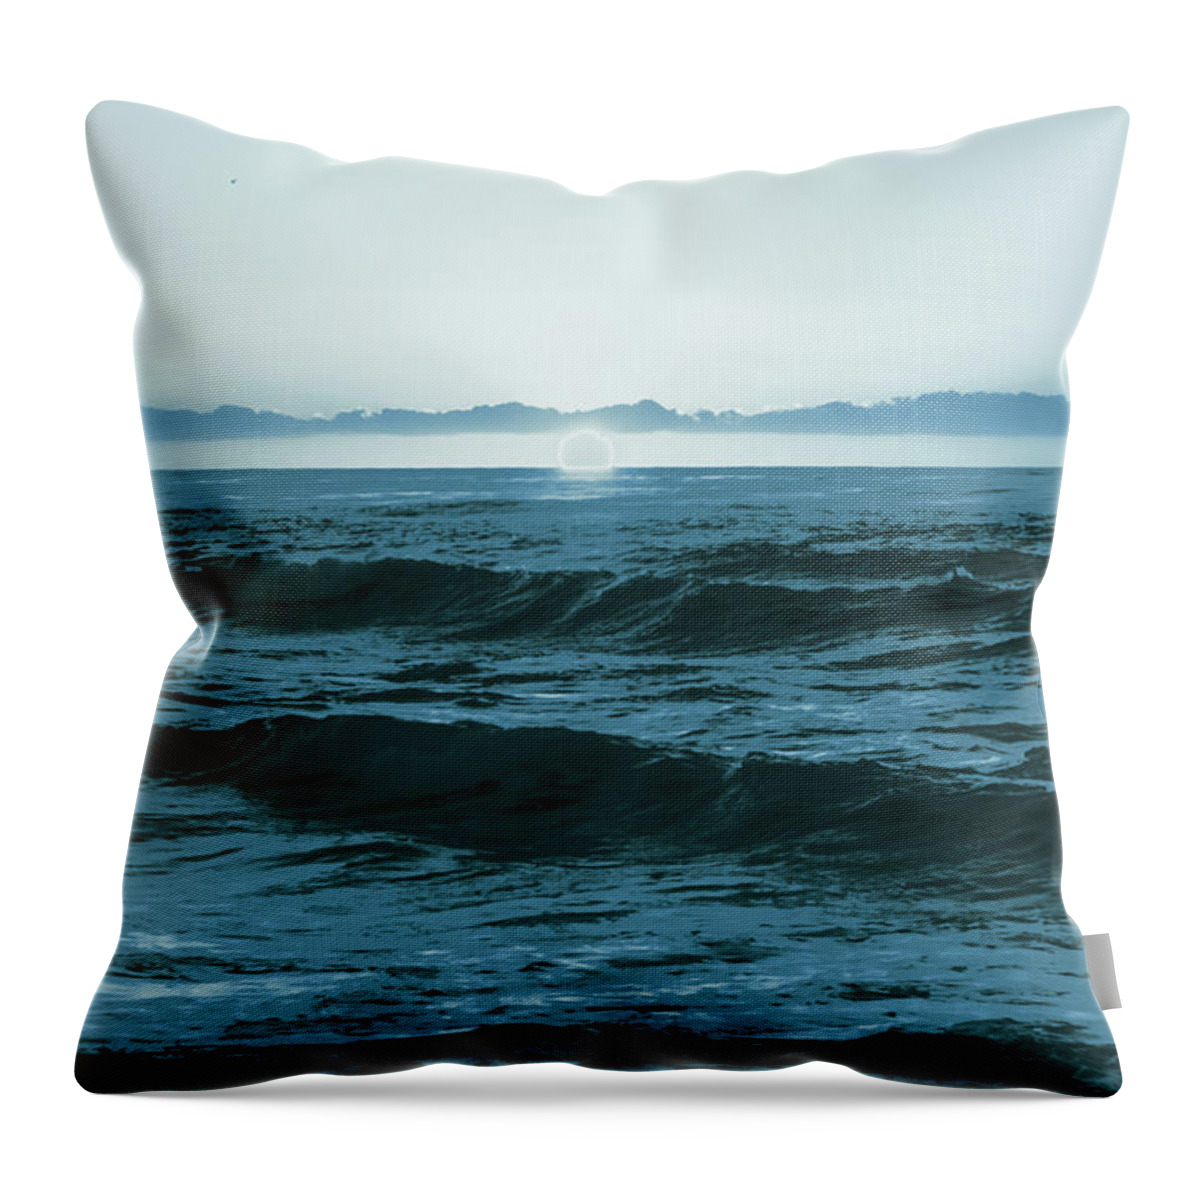  Blue Throw Pillow featuring the photograph Blue Sunset by Local Snaps Photography